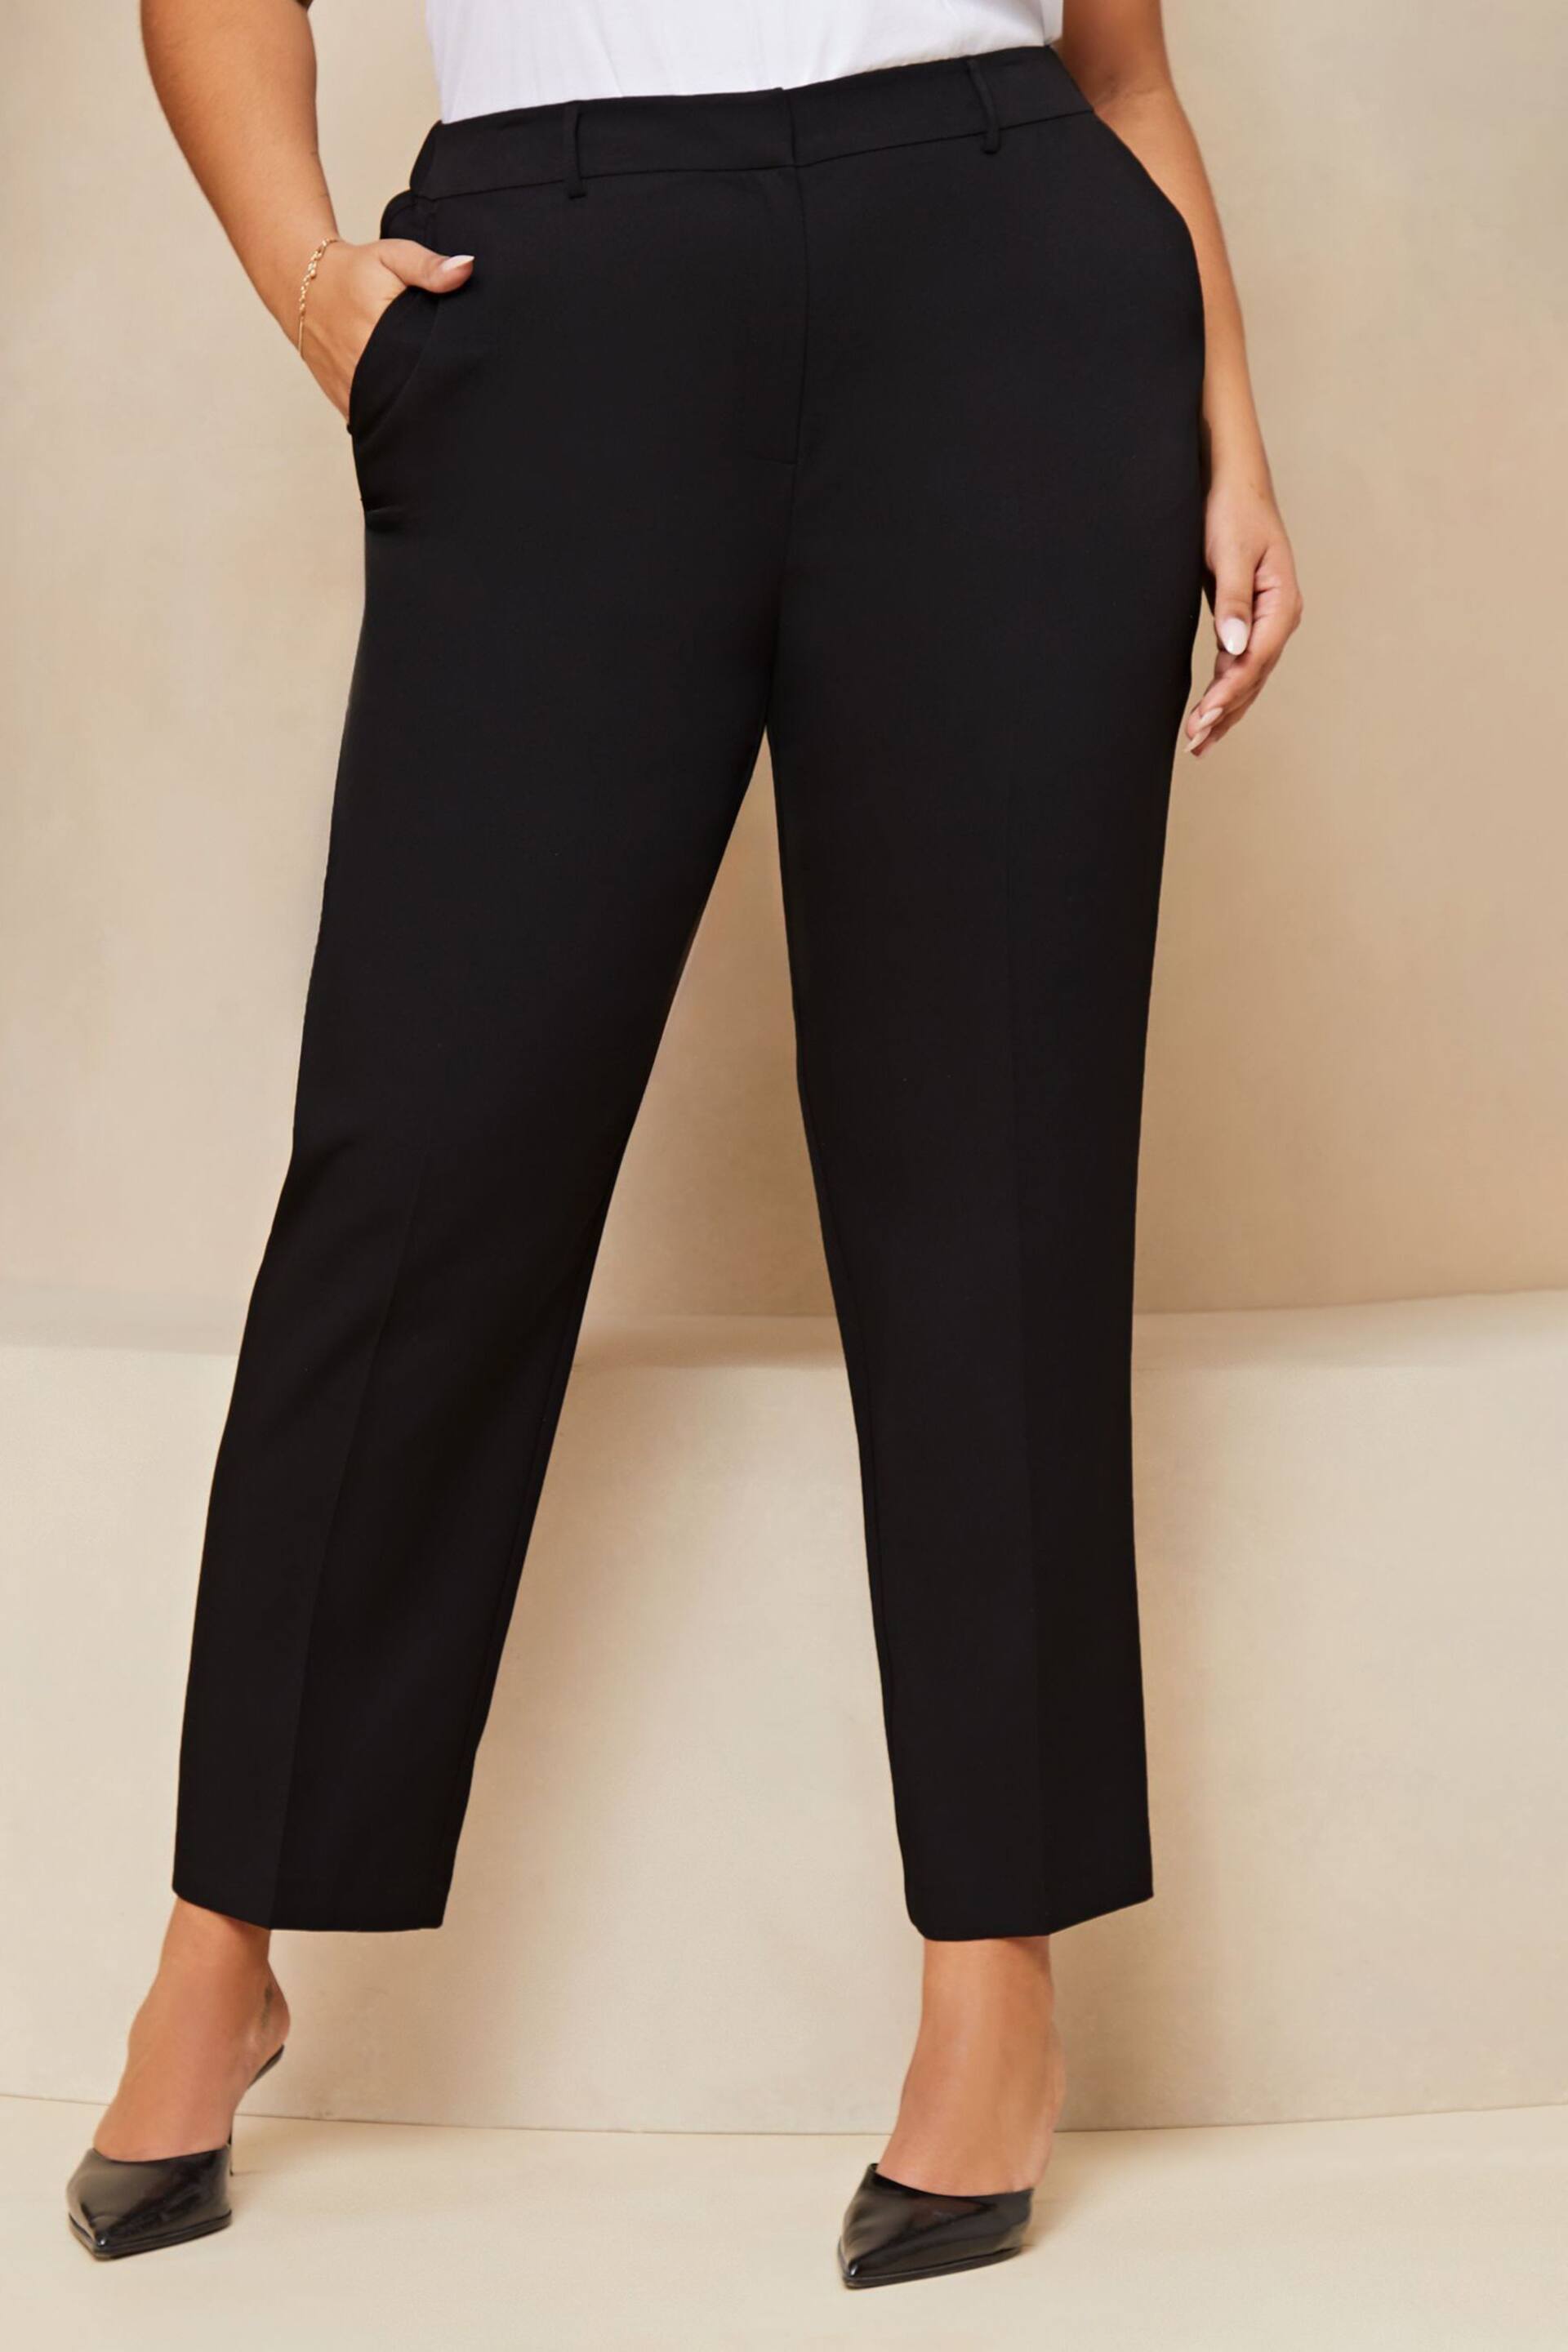 Lipsy Black Curve Tailored Tapered Smart Trousers - Image 1 of 4